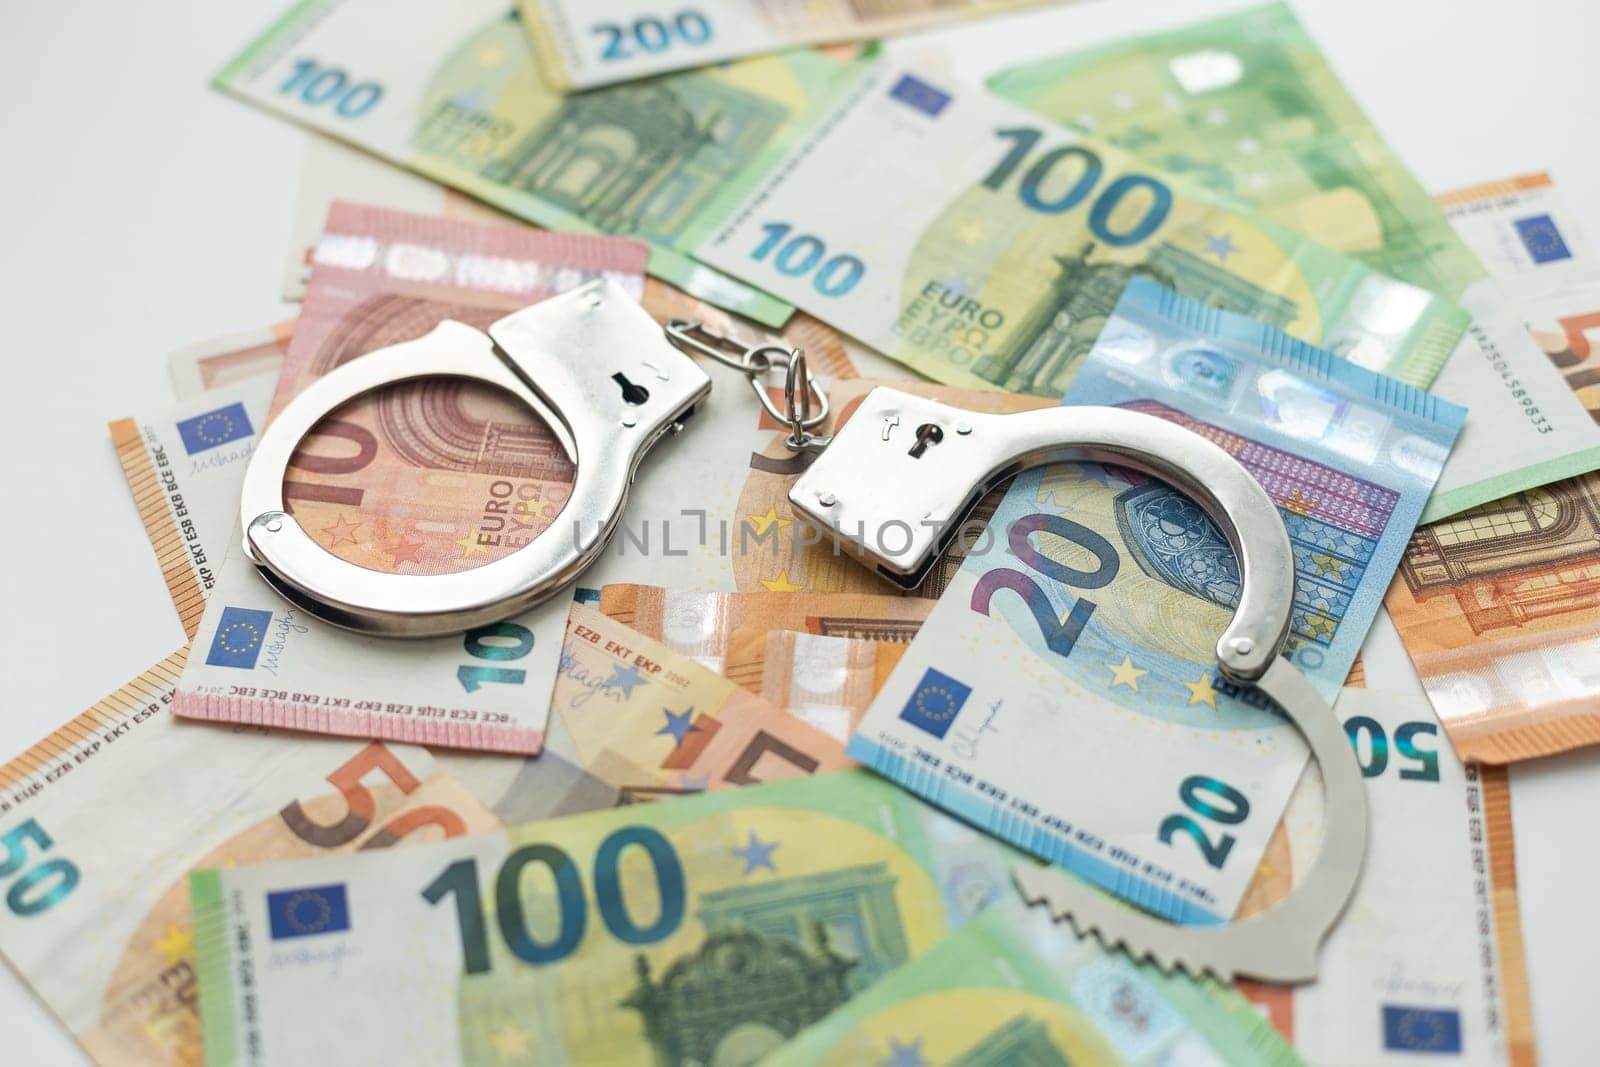 Police handcuffs lies on a set of green monetary denominations of 100 euros. A lot of money forms an infinite heap. High quality photo